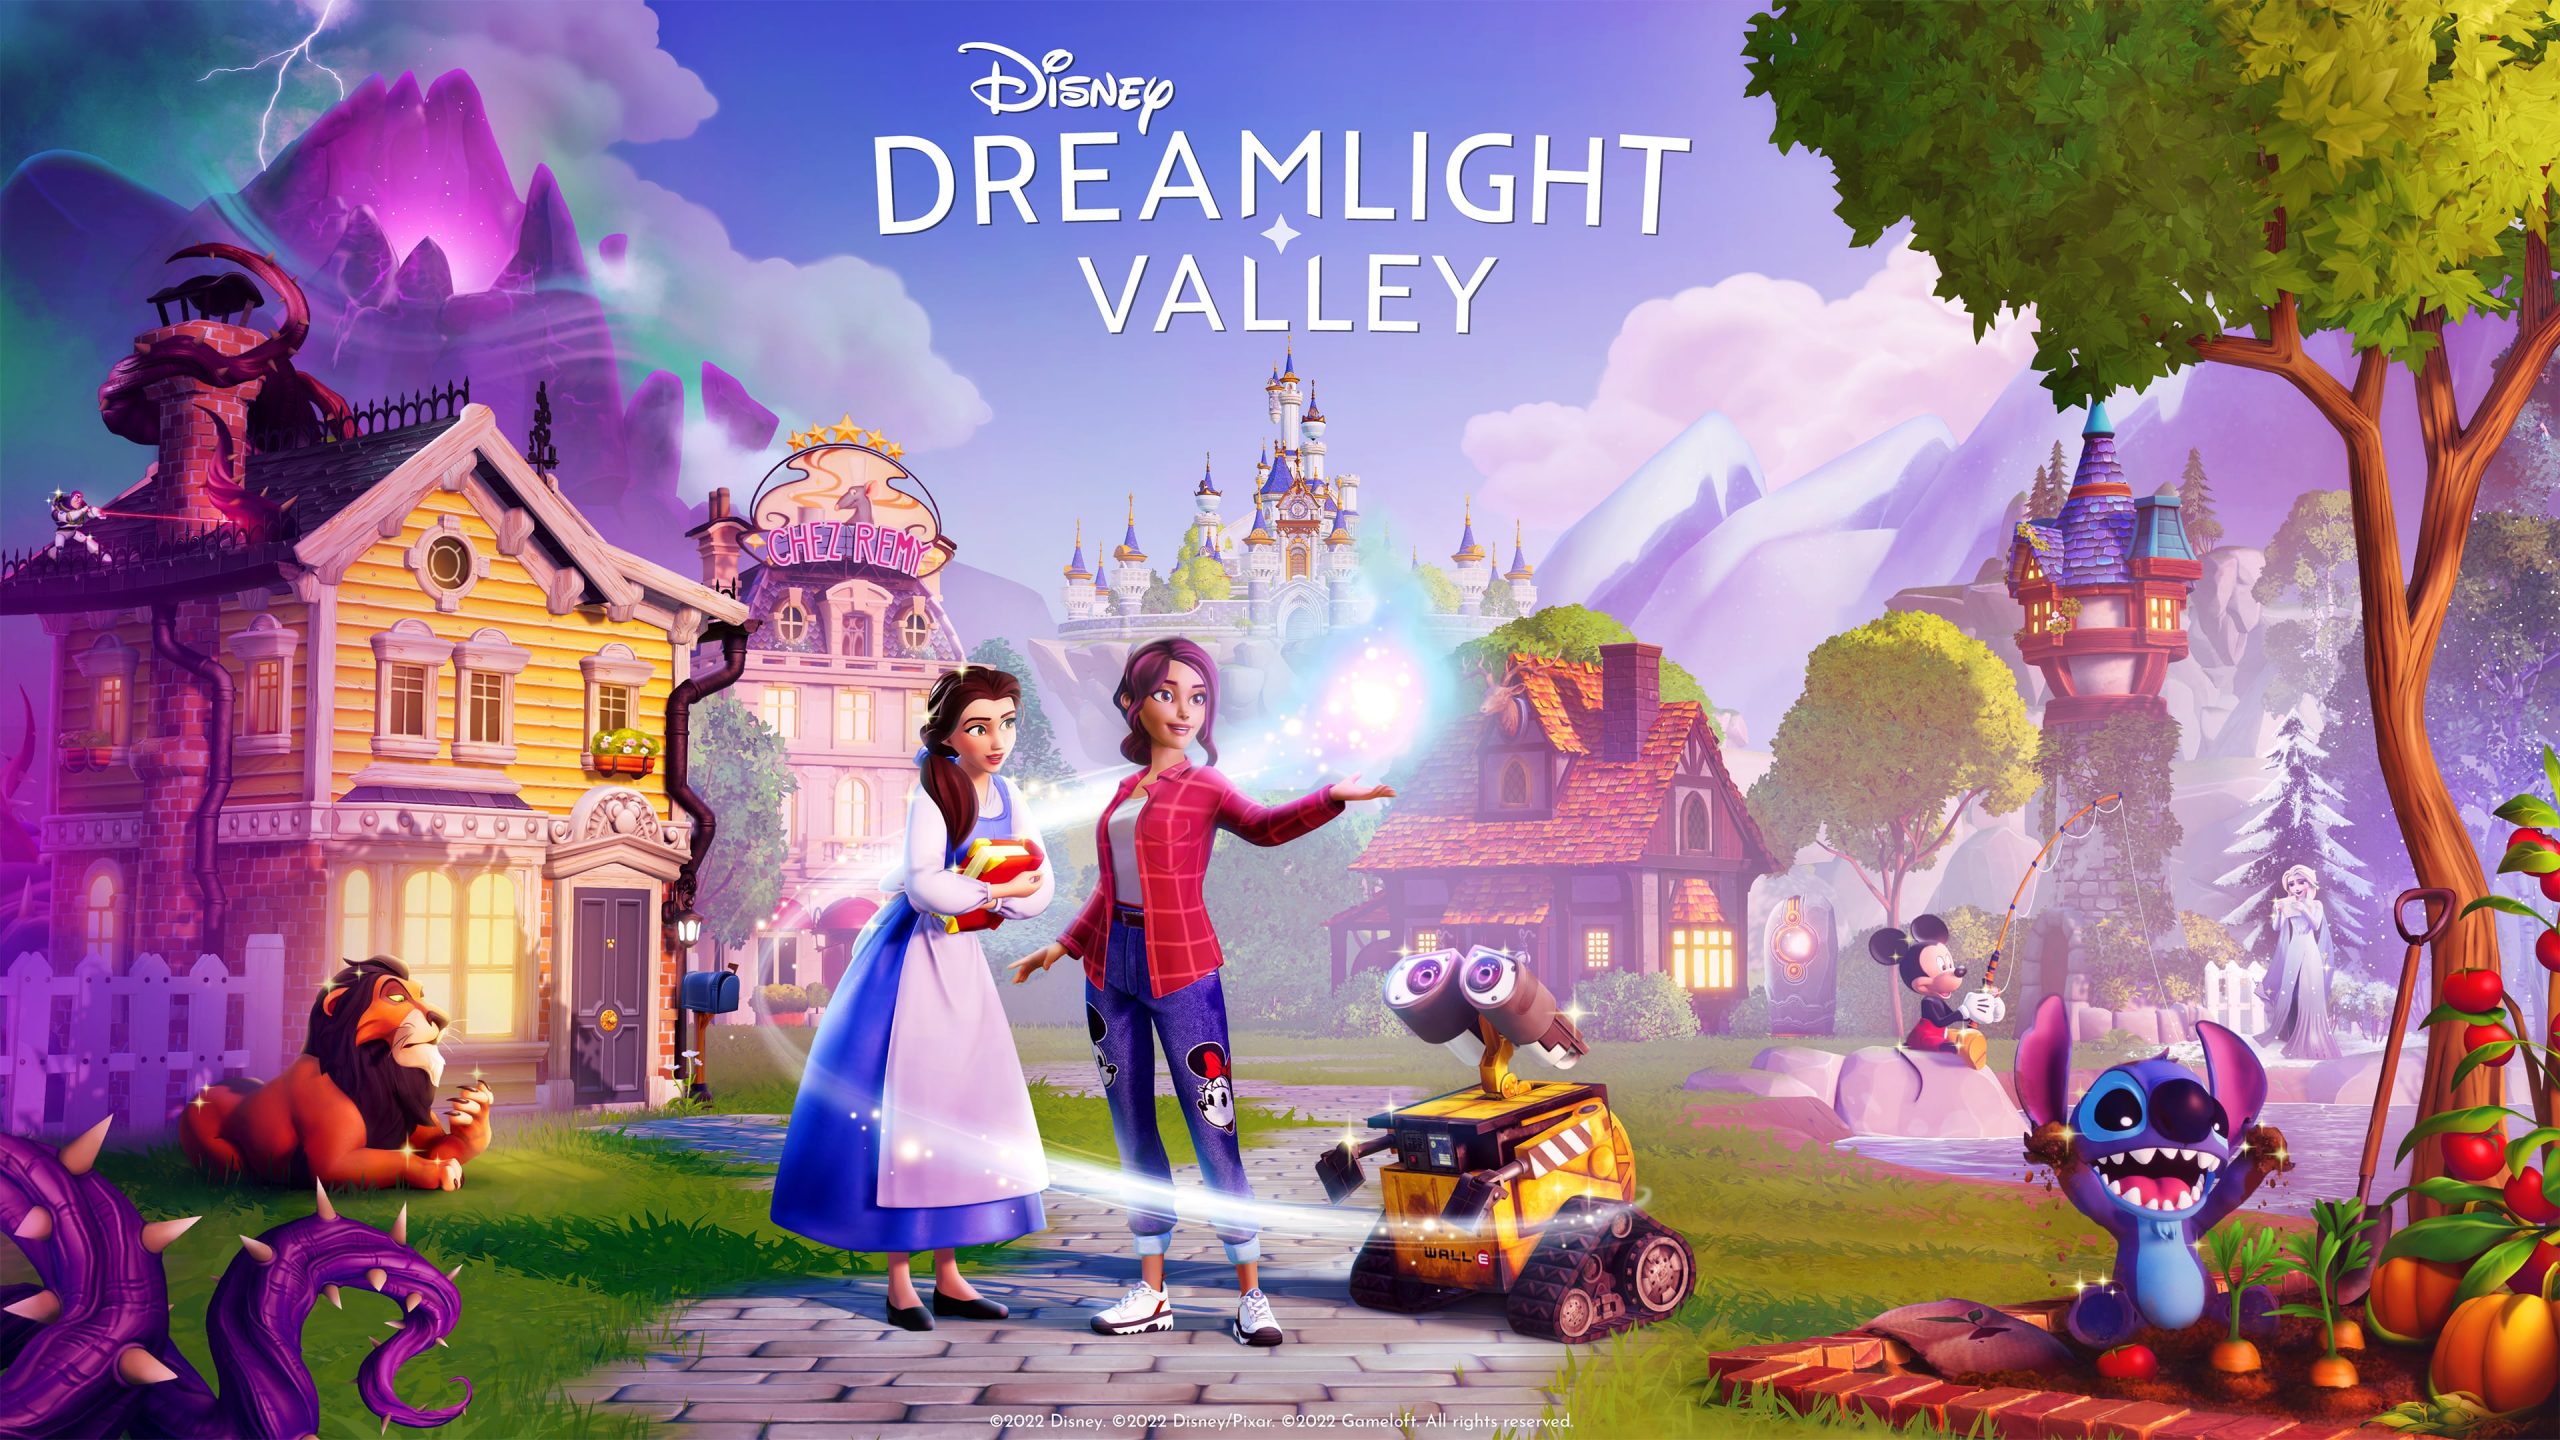 disney-dreamlight-valley-feature-image-scaled-1